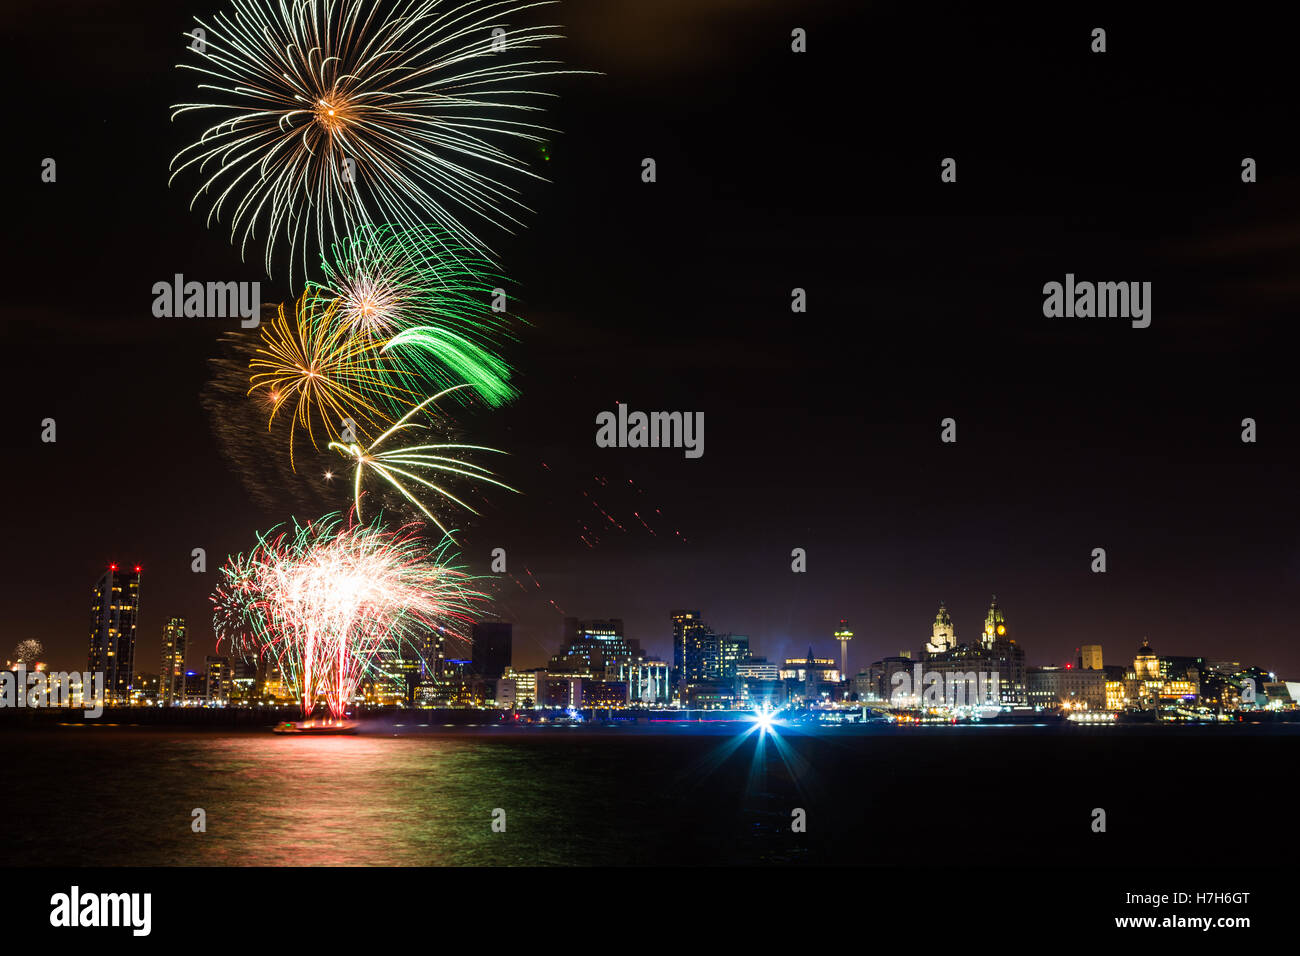 Liverpool and the Wirral staged its first ever River of Light festival on Saturday, November 5, 2016 for a Bonfire Night fireworks display on the River Mersey. Credit:  Christopher Middleton/Alamy Live News Stock Photo